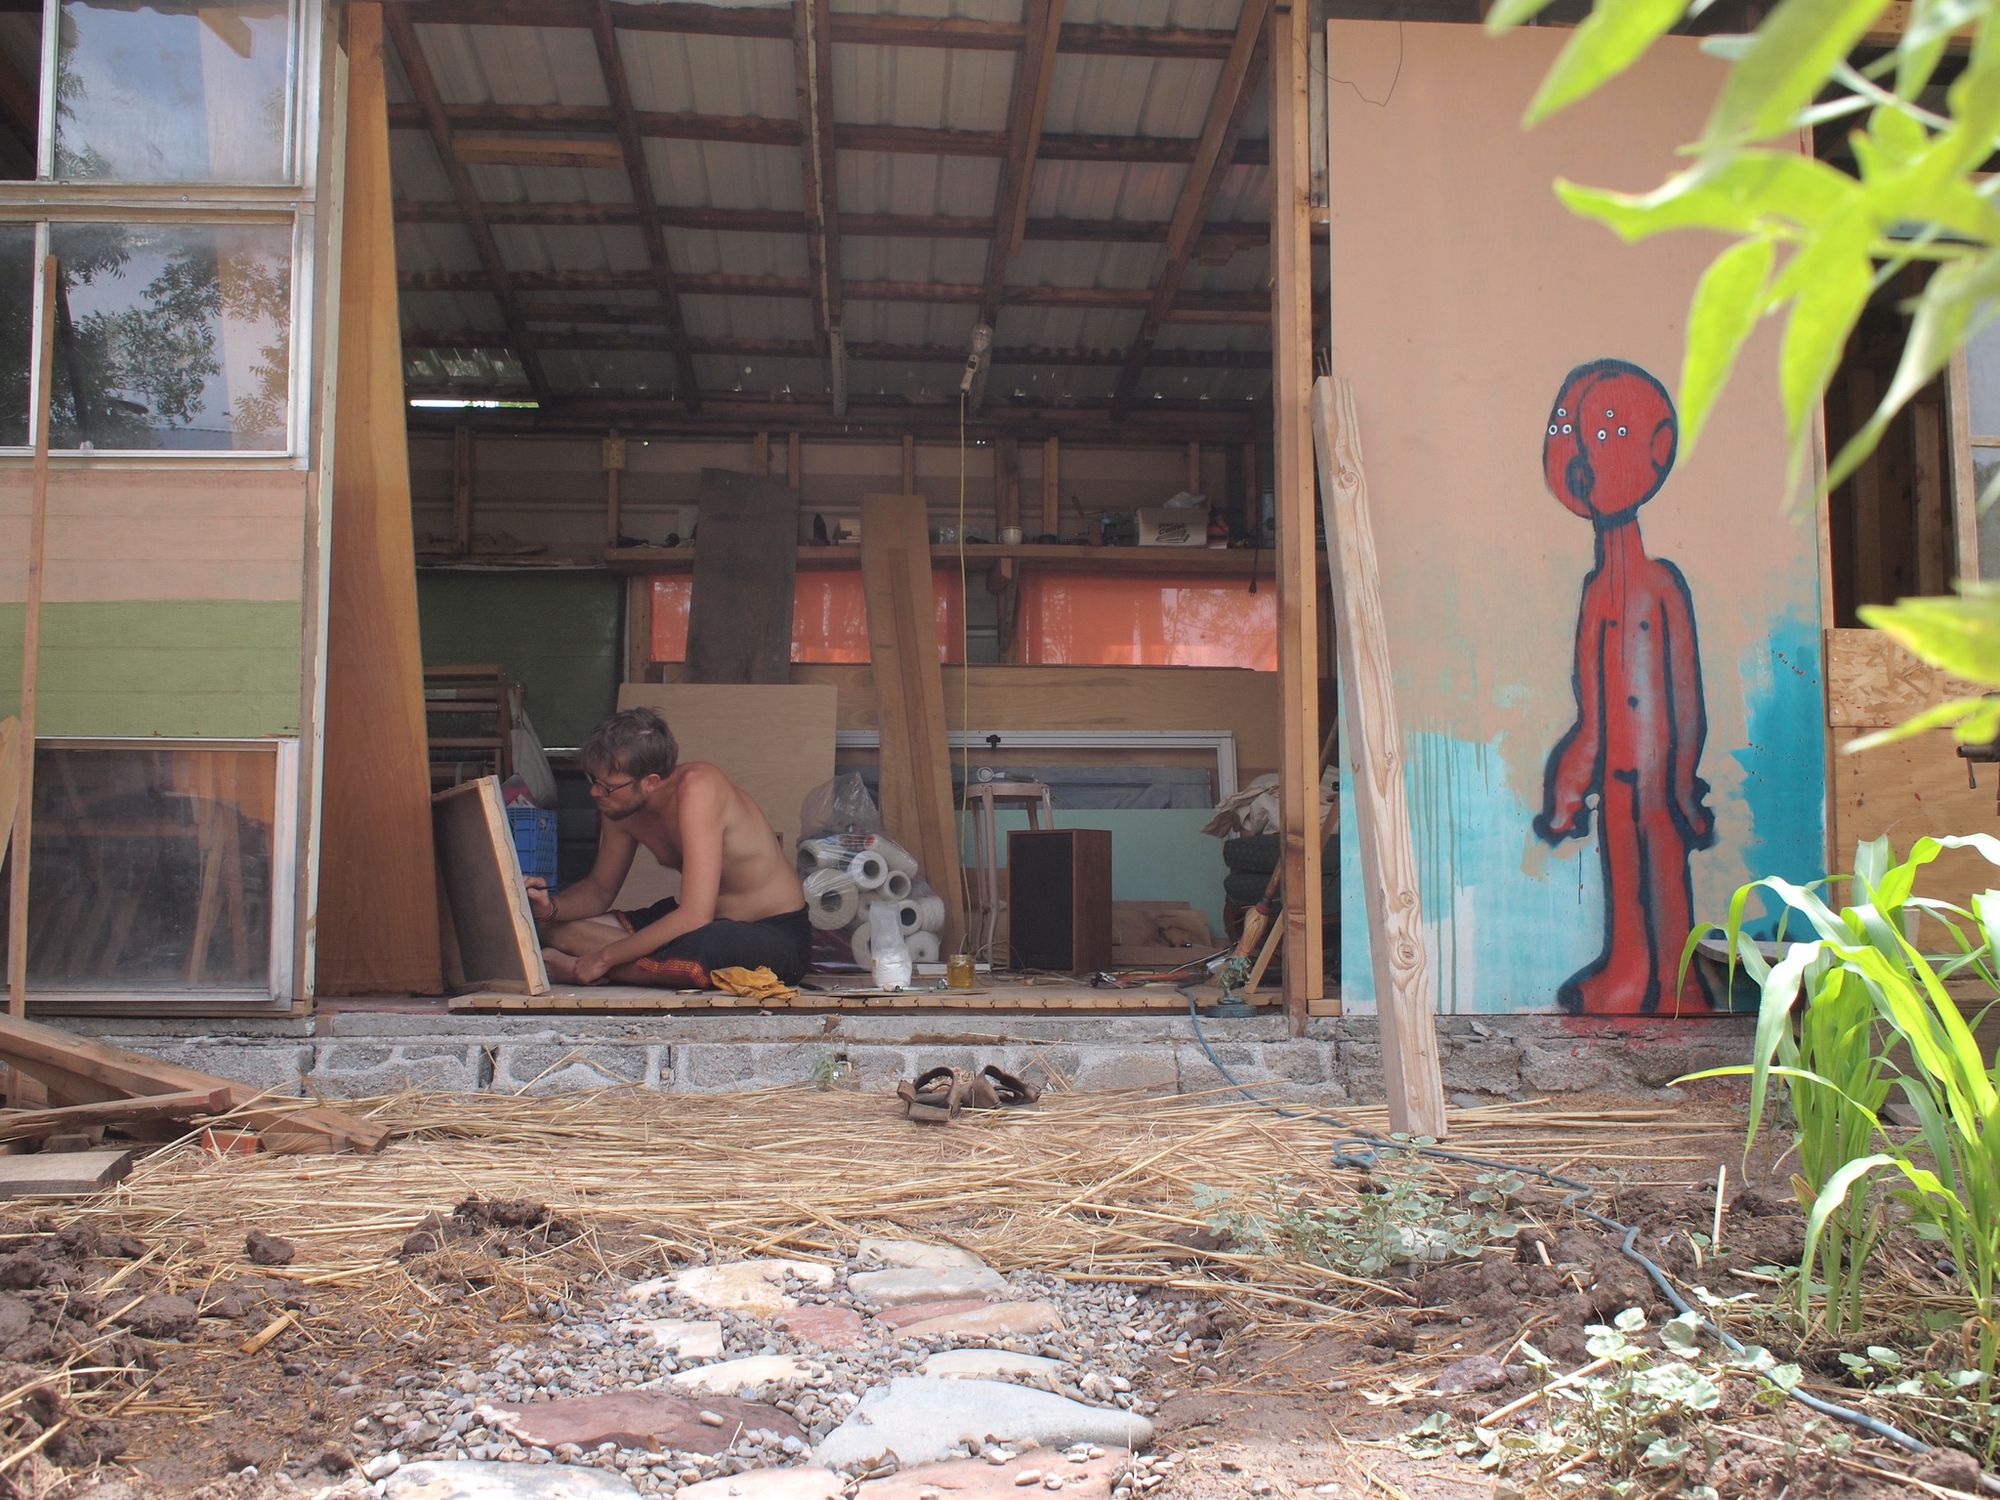 A man sits on the ground painting in the doorway of an unfinished building.